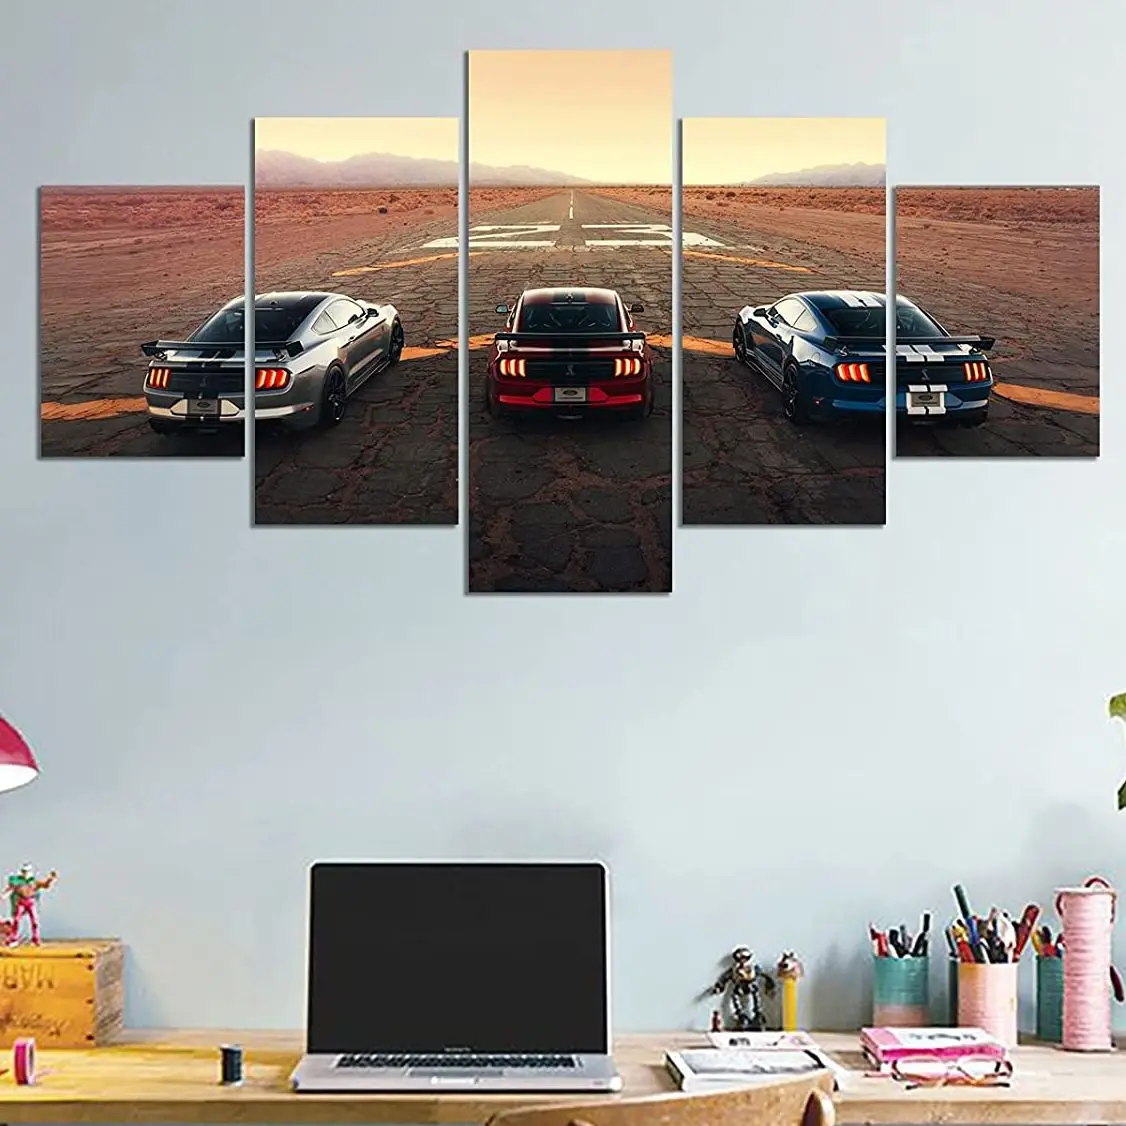 

No Framed 5 Pieces Ford Mustang Racing Muscle Car HD Print Wall Art Canvas Posters Pictures Paintings Home Decor for Living Room